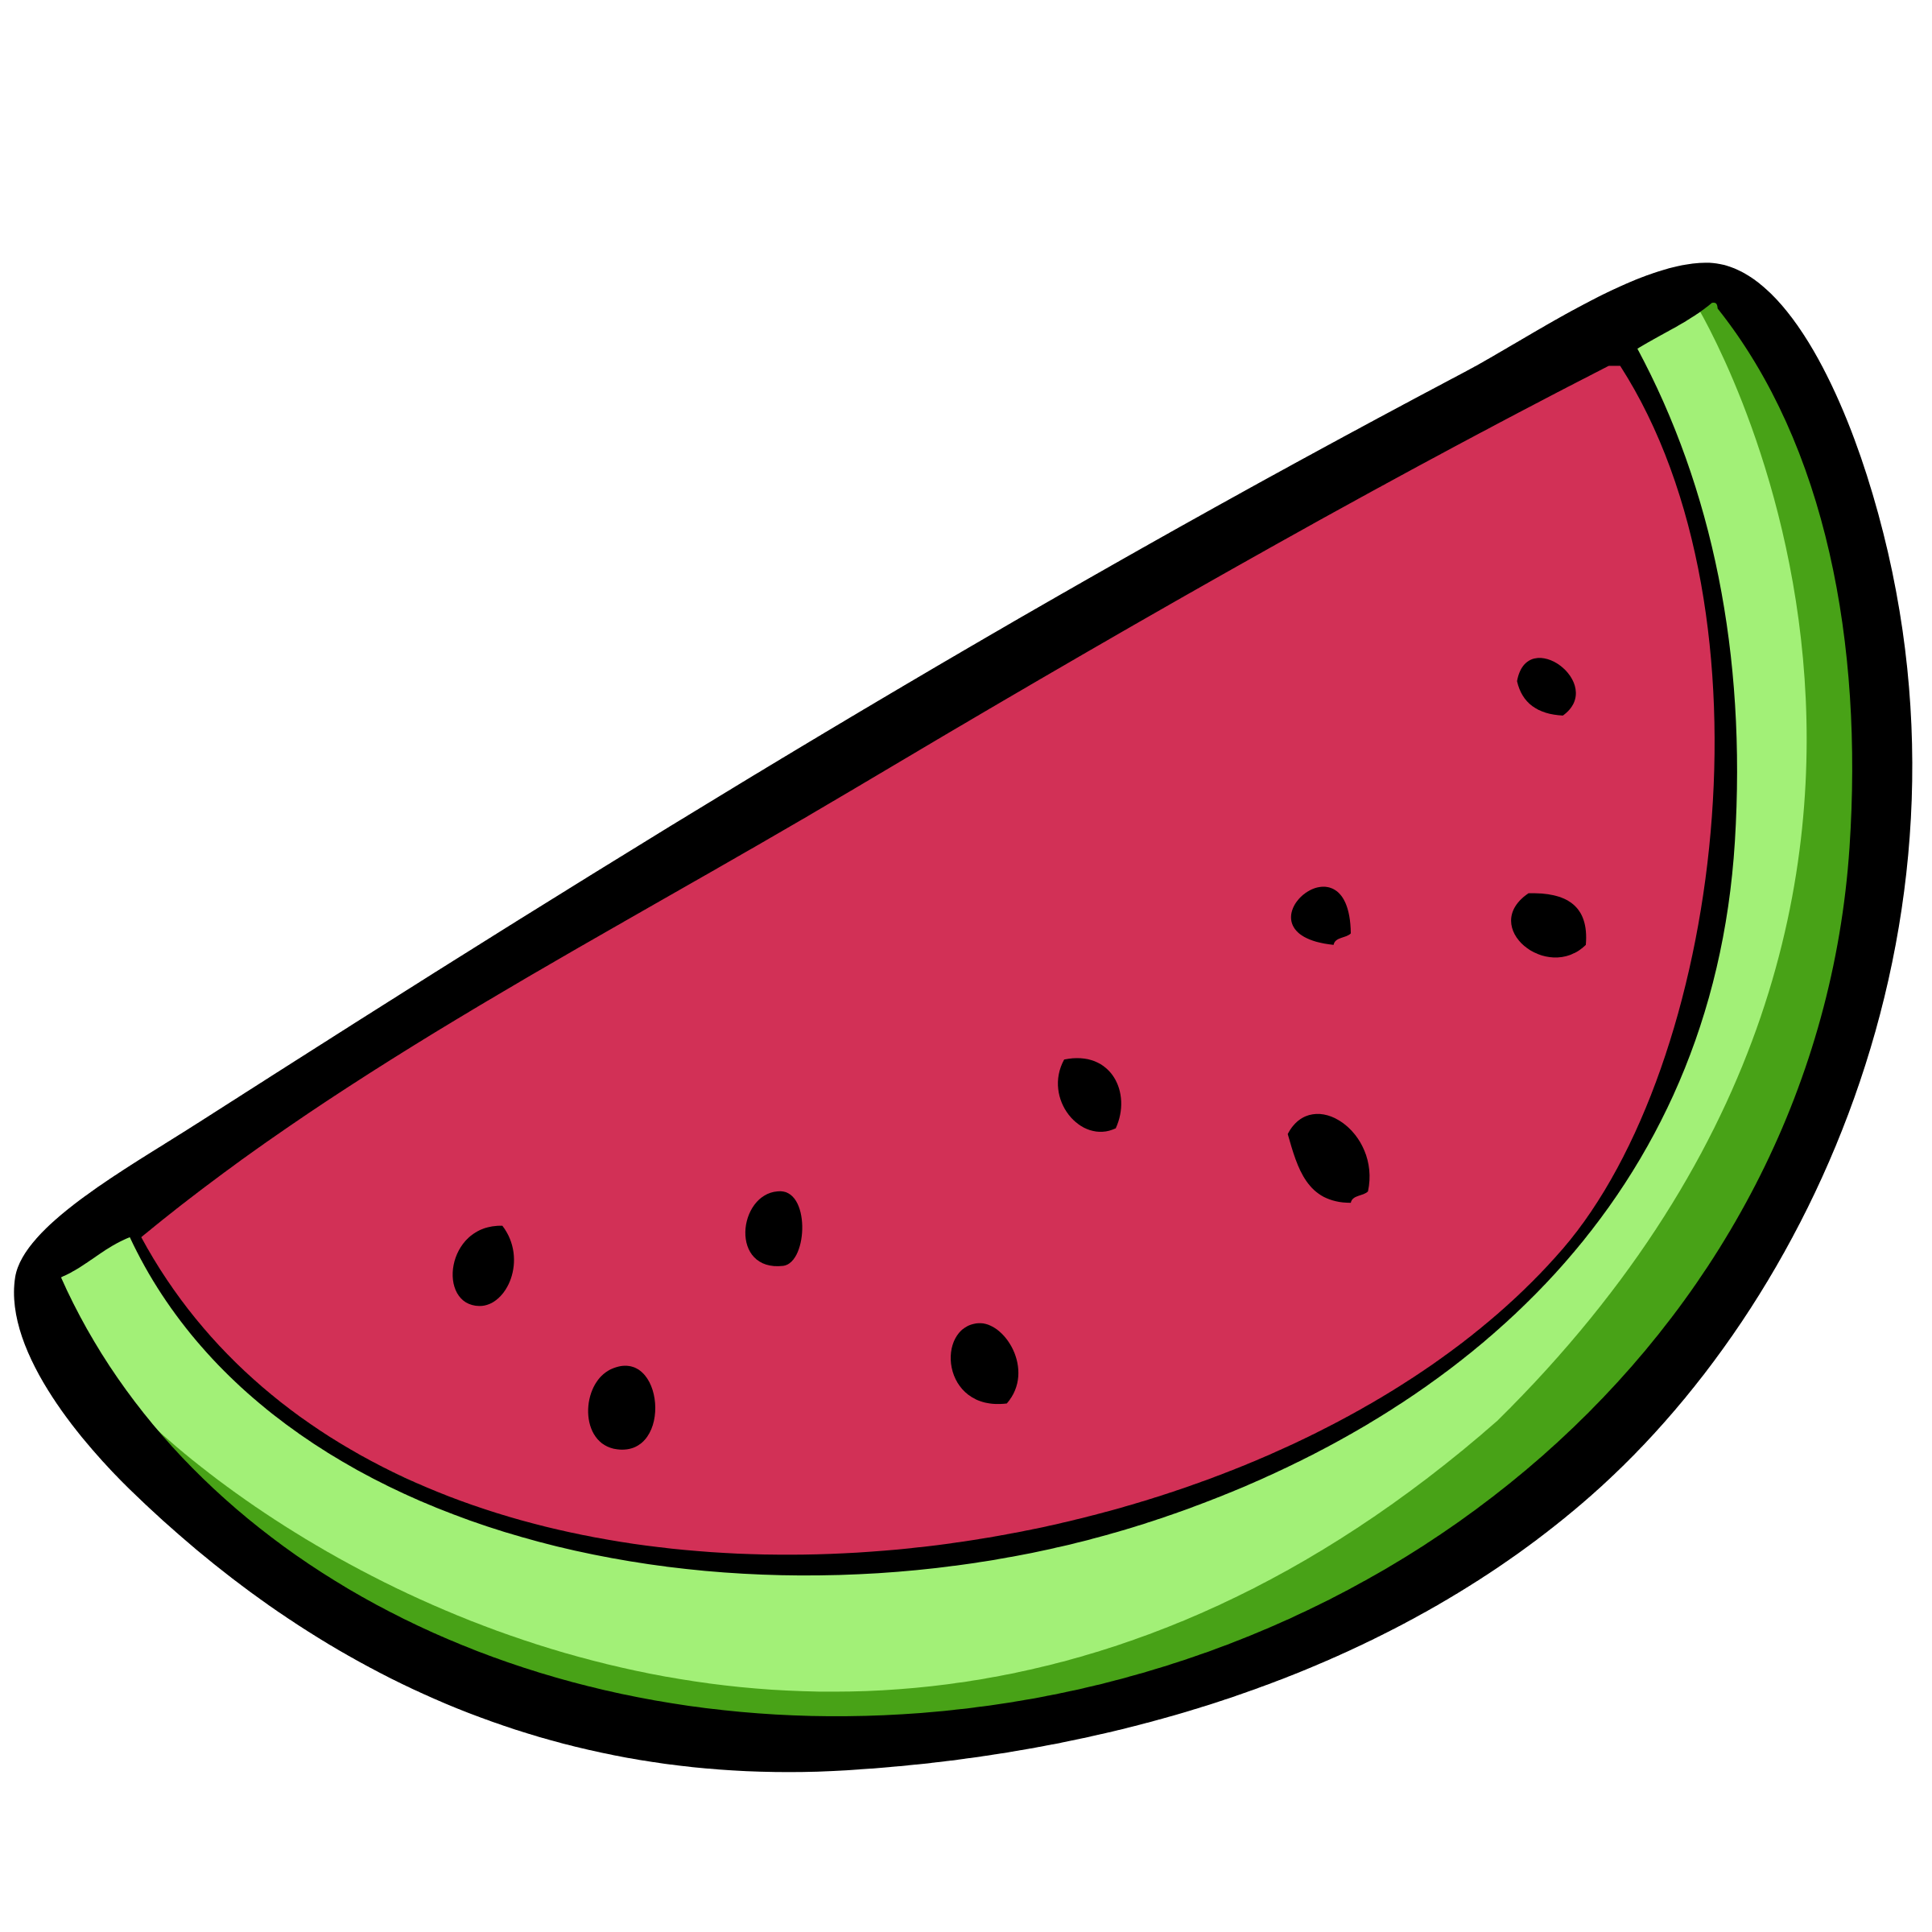 Clipart - Watermelon | Clipart library - Free Clipart Images